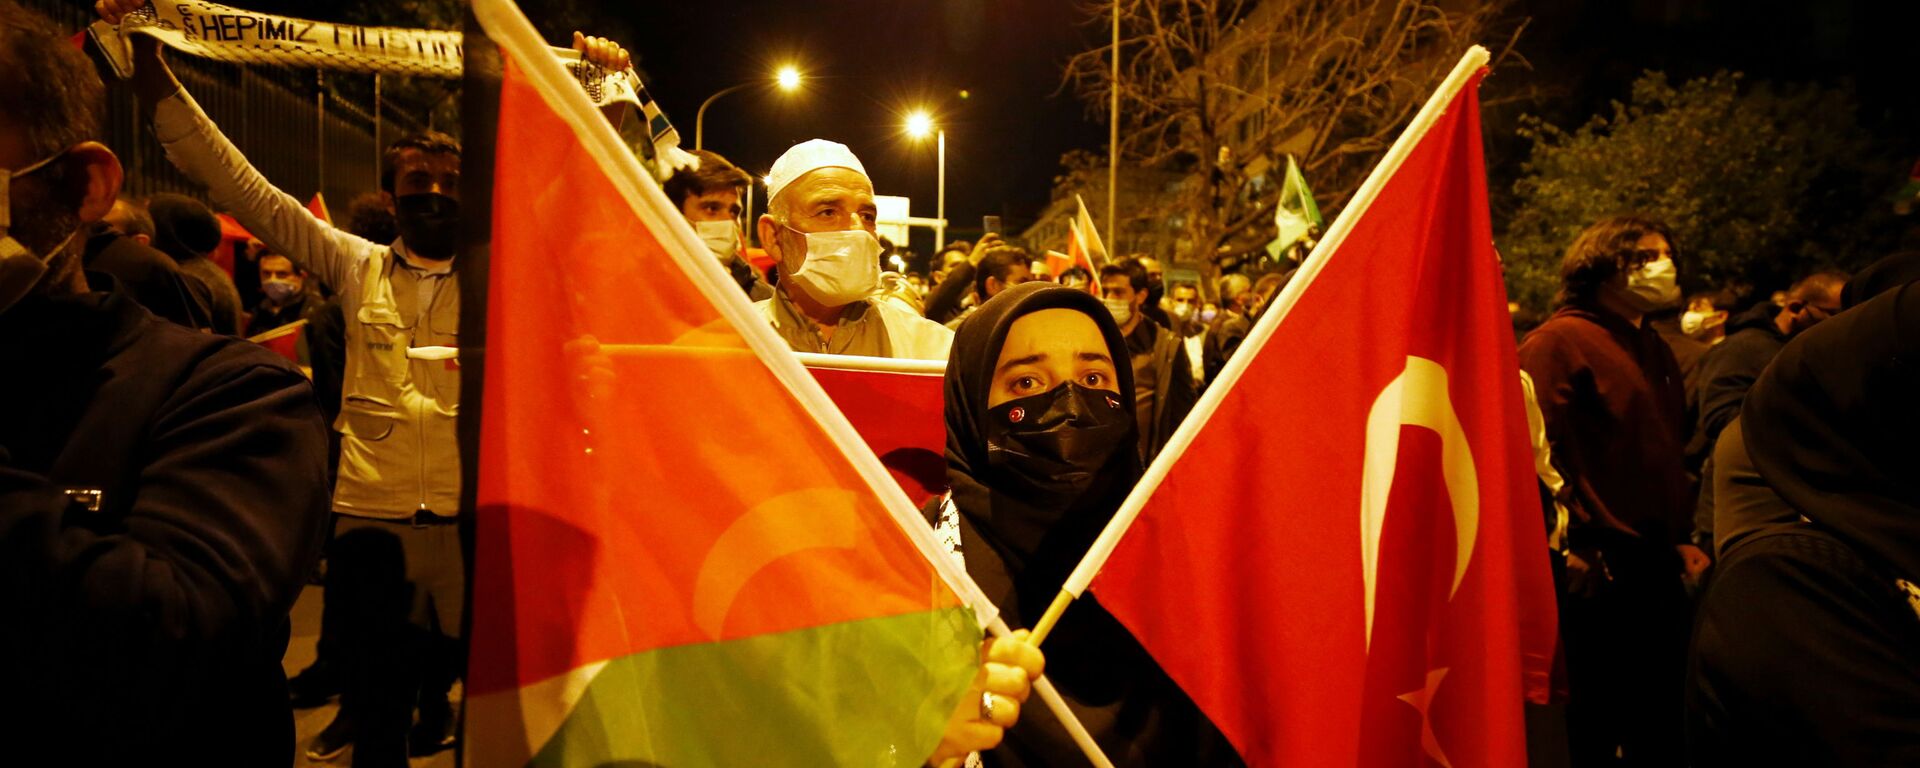 Demonstrators march with Turkish and Palestinian flags during a protest against Israel in Ankara, Turkey late May 10, 2021 - Sputnik International, 1920